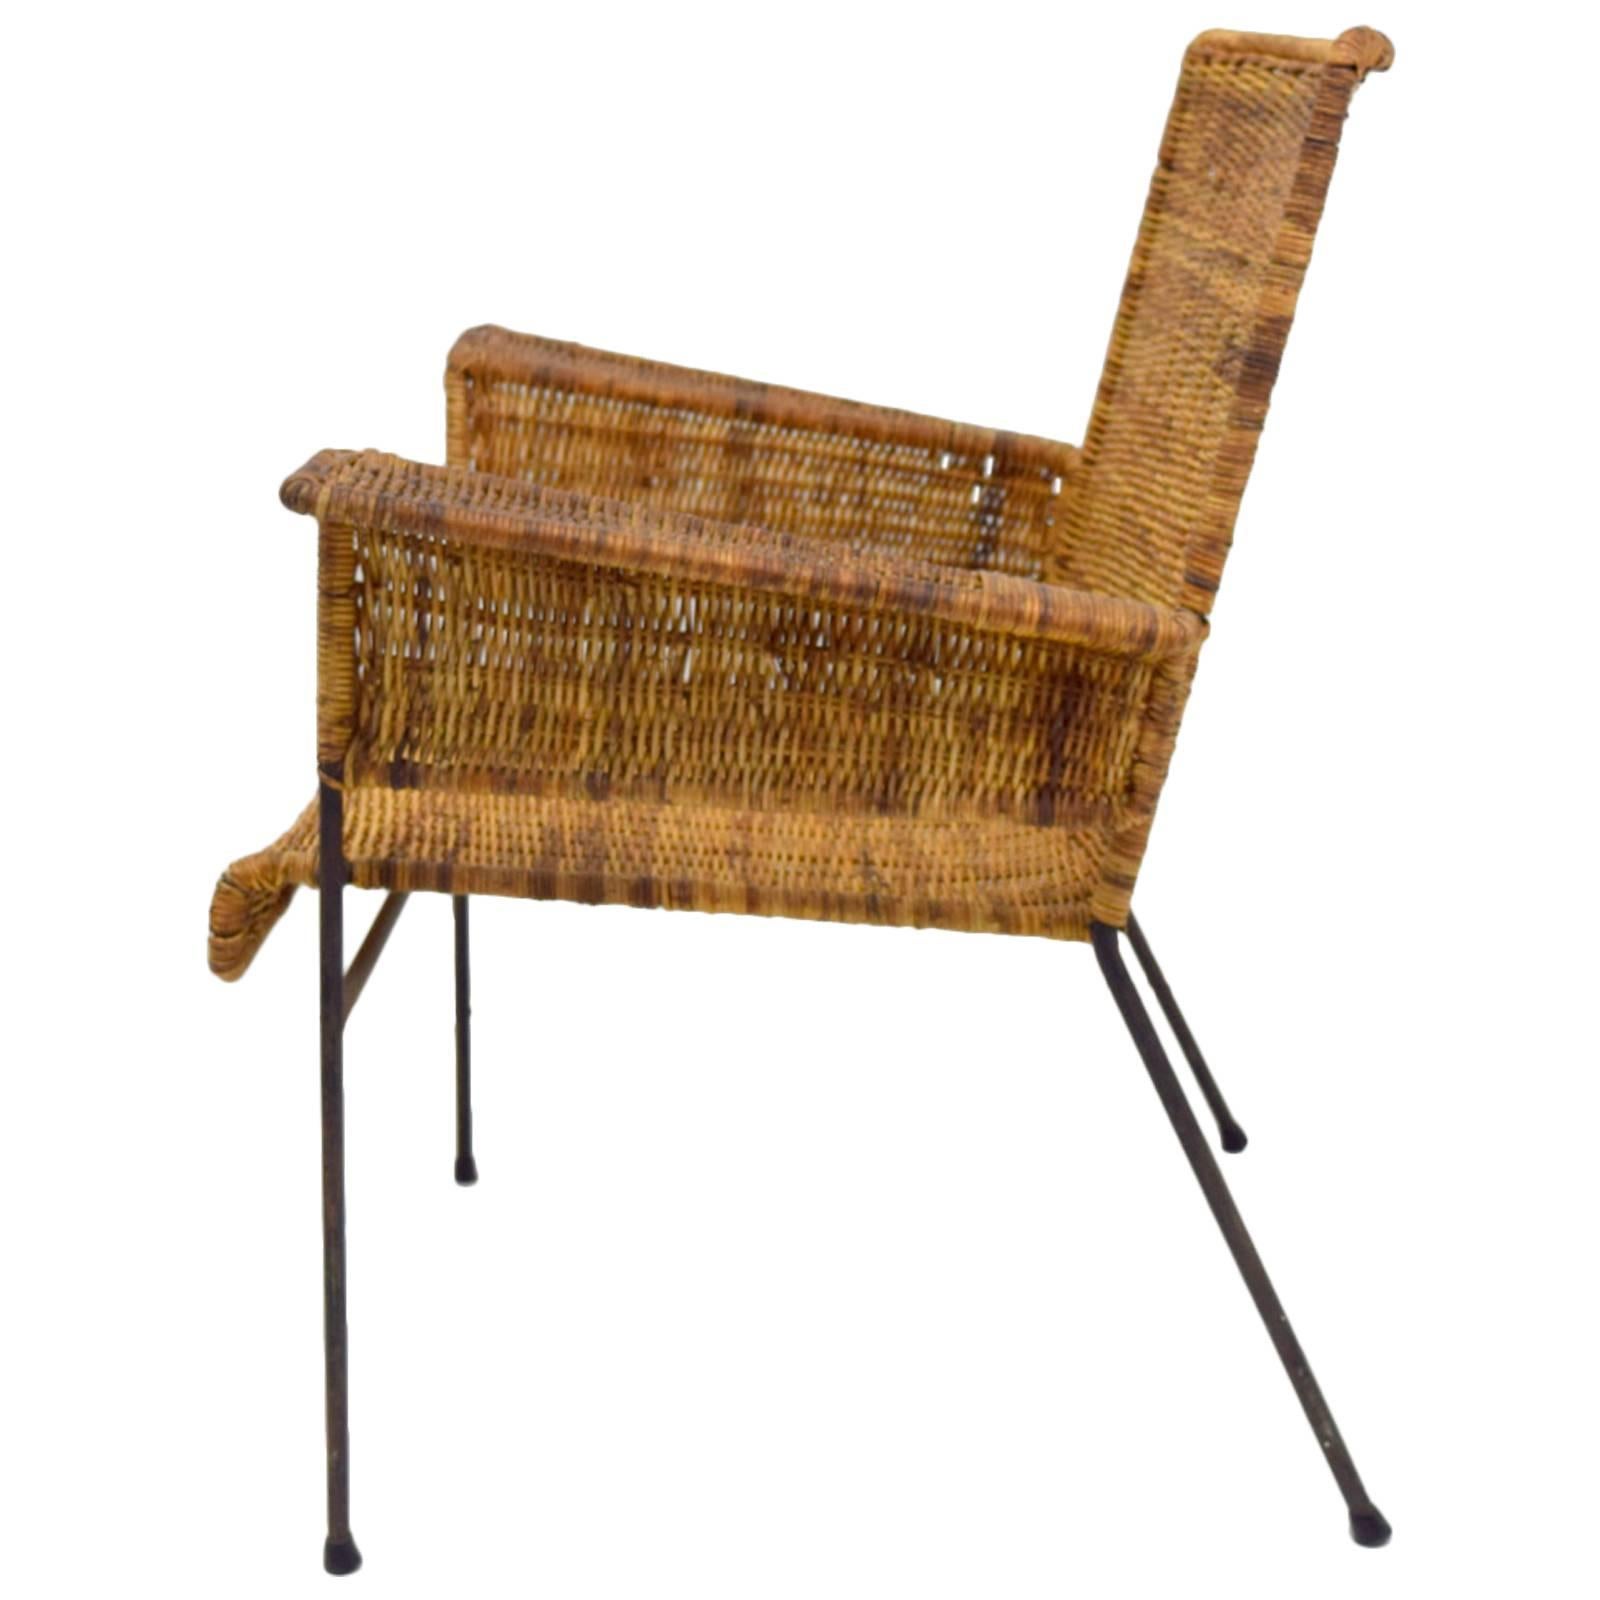 Van Keppel-Green Iron and Wicker Lounge Chair